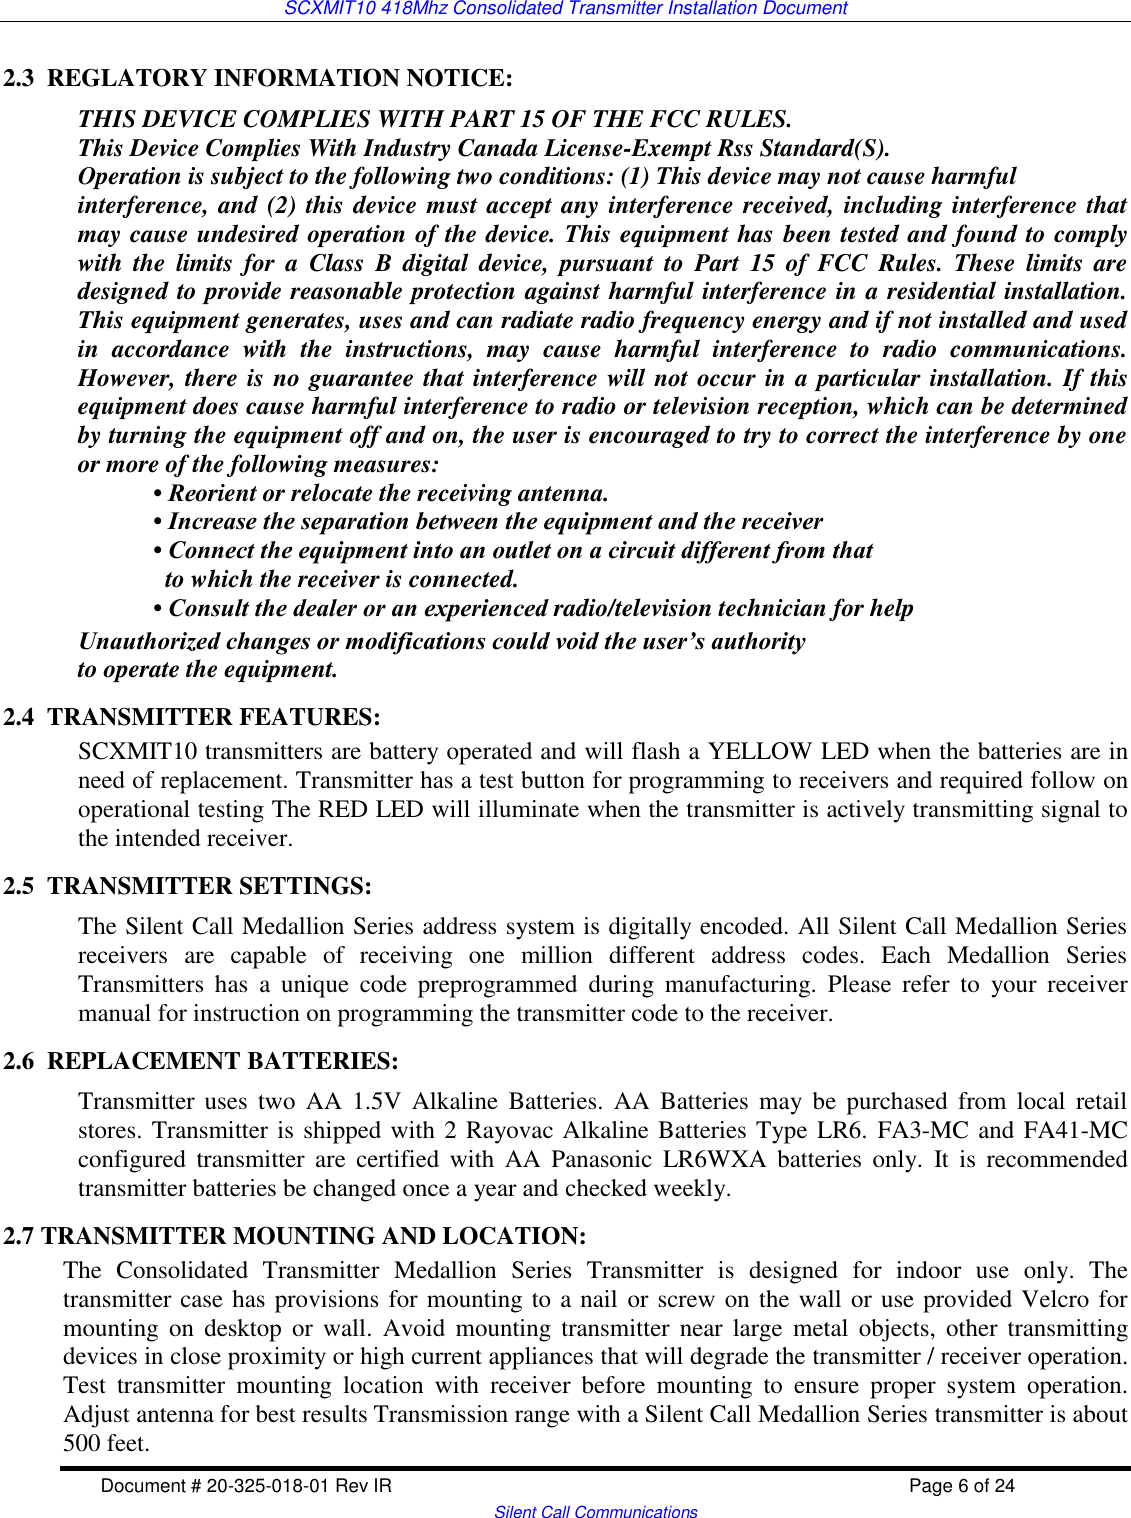 SCXMIT10 418Mhz Consolidated Transmitter Installation Document  Document # 20-325-018-01 Rev IR    Page 6 of 24   Silent Call Communications 2.3  REGLATORY INFORMATION NOTICE:   THIS DEVICE COMPLIES WITH PART 15 OF THE FCC RULES. This Device Complies With Industry Canada License-Exempt Rss Standard(S). Operation is subject to the following two conditions: (1) This device may not cause harmful interference, and (2) this device must accept any interference received, including interference that may cause undesired operation of the device. This equipment has been tested and found to comply with  the  limits  for  a  Class  B  digital  device,  pursuant  to  Part  15  of  FCC  Rules.  These  limits  are designed to provide reasonable protection against harmful interference in a residential installation. This equipment generates, uses and can radiate radio frequency energy and if not installed and used in  accordance  with  the  instructions,  may  cause  harmful  interference  to  radio  communications. However, there is no guarantee that interference will not occur in a particular installation. If this equipment does cause harmful interference to radio or television reception, which can be determined by turning the equipment off and on, the user is encouraged to try to correct the interference by one or more of the following measures: • Reorient or relocate the receiving antenna. • Increase the separation between the equipment and the receiver • Connect the equipment into an outlet on a circuit different from that   to which the receiver is connected. • Consult the dealer or an experienced radio/television technician for help Unauthorized changes or modifications could void the user’s authority to operate the equipment. 2.4  TRANSMITTER FEATURES: SCXMIT10 transmitters are battery operated and will flash a YELLOW LED when the batteries are in need of replacement. Transmitter has a test button for programming to receivers and required follow on operational testing The RED LED will illuminate when the transmitter is actively transmitting signal to the intended receiver.  2.5  TRANSMITTER SETTINGS: The Silent Call Medallion Series address system is digitally encoded. All Silent Call Medallion Series receivers  are  capable  of  receiving  one  million  different  address  codes.  Each  Medallion  Series Transmitters  has  a  unique  code  preprogrammed  during  manufacturing.  Please  refer  to  your  receiver manual for instruction on programming the transmitter code to the receiver. 2.6  REPLACEMENT BATTERIES: Transmitter  uses two  AA  1.5V  Alkaline  Batteries.  AA  Batteries may  be  purchased  from local  retail stores. Transmitter is shipped with 2 Rayovac Alkaline Batteries Type LR6. FA3-MC and FA41-MC configured  transmitter  are  certified  with  AA  Panasonic  LR6WXA  batteries  only.  It  is  recommended transmitter batteries be changed once a year and checked weekly. 2.7 TRANSMITTER MOUNTING AND LOCATION:   The  Consolidated  Transmitter  Medallion  Series  Transmitter  is  designed  for  indoor  use  only.  The transmitter case has provisions for mounting to a nail or screw on the wall or use provided Velcro for mounting  on desktop or  wall.  Avoid  mounting transmitter near  large  metal  objects,  other transmitting devices in close proximity or high current appliances that will degrade the transmitter / receiver operation. Test  transmitter  mounting  location  with  receiver  before  mounting  to  ensure  proper  system  operation. Adjust antenna for best results Transmission range with a Silent Call Medallion Series transmitter is about 500 feet. 